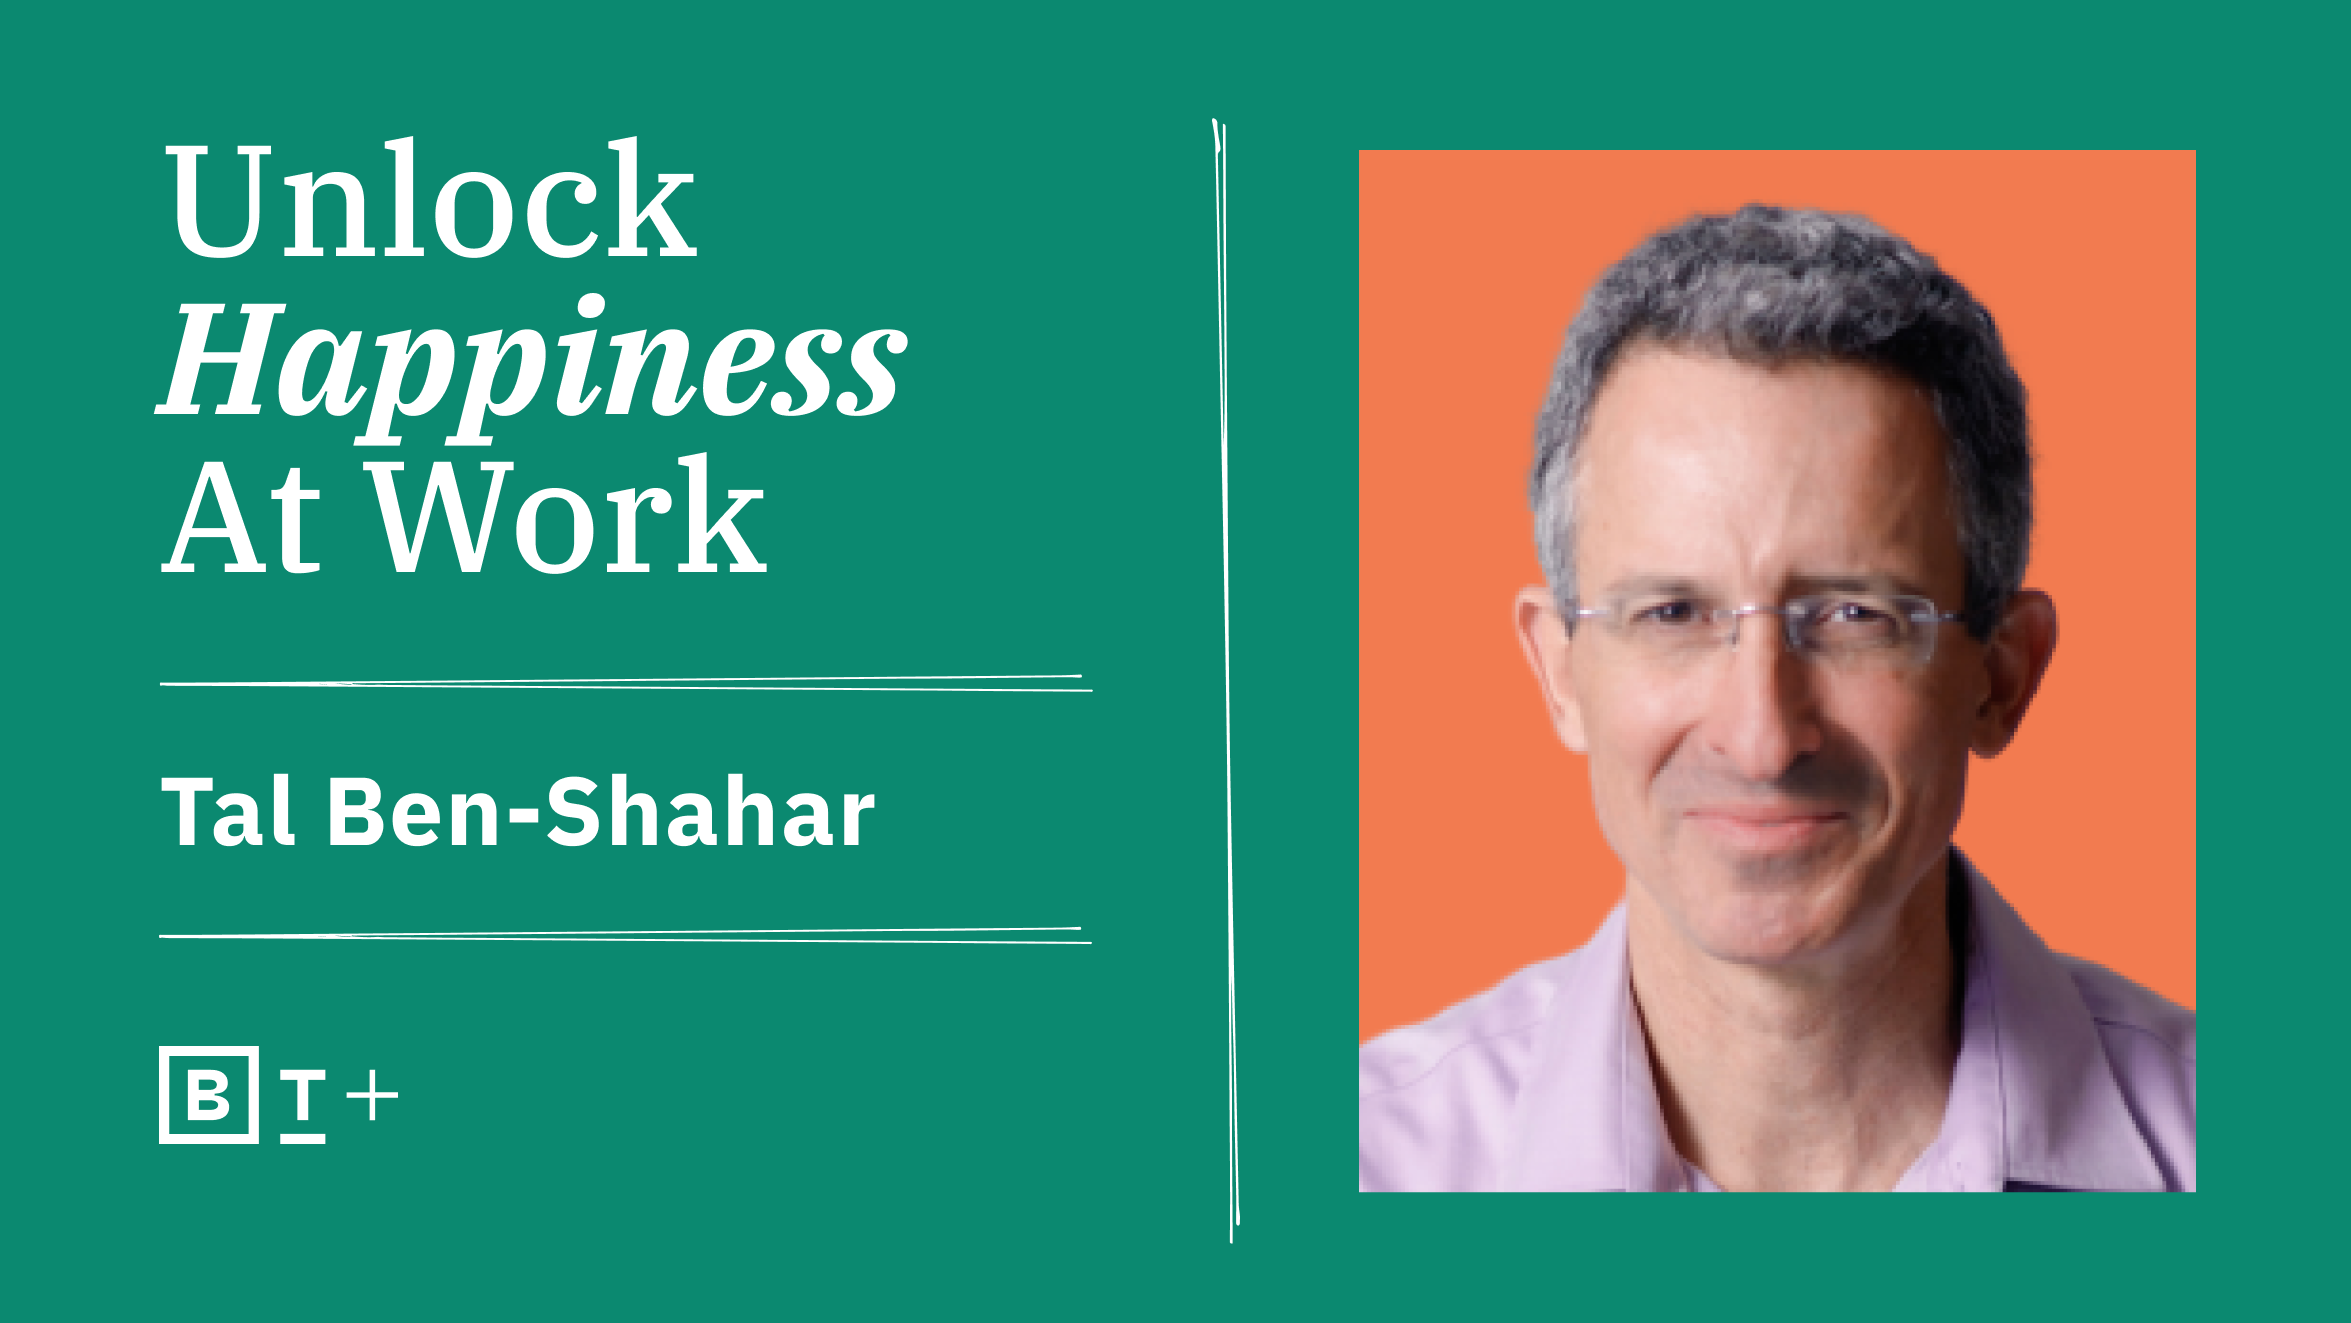 Unlock happiness at work with tal ben shahar.